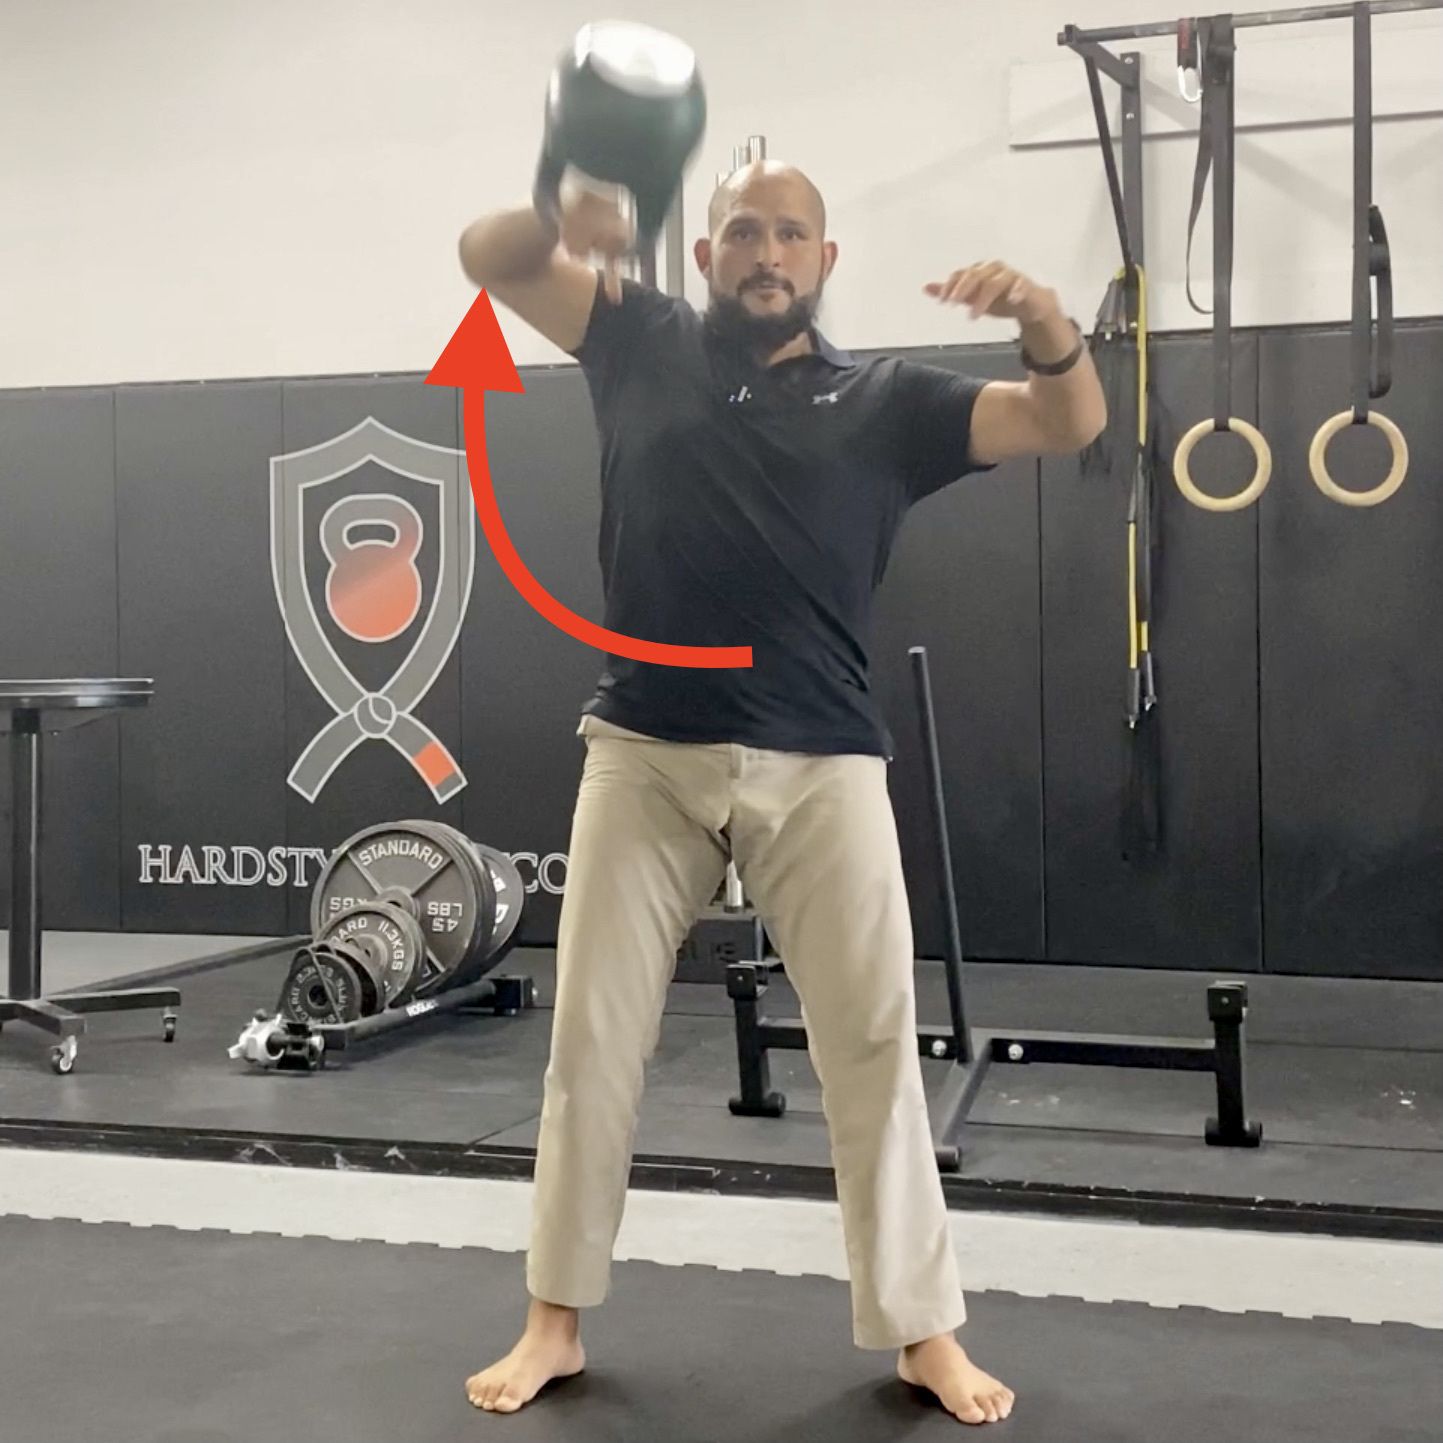 how to improve you're kettlebell snatch, improve your snatch